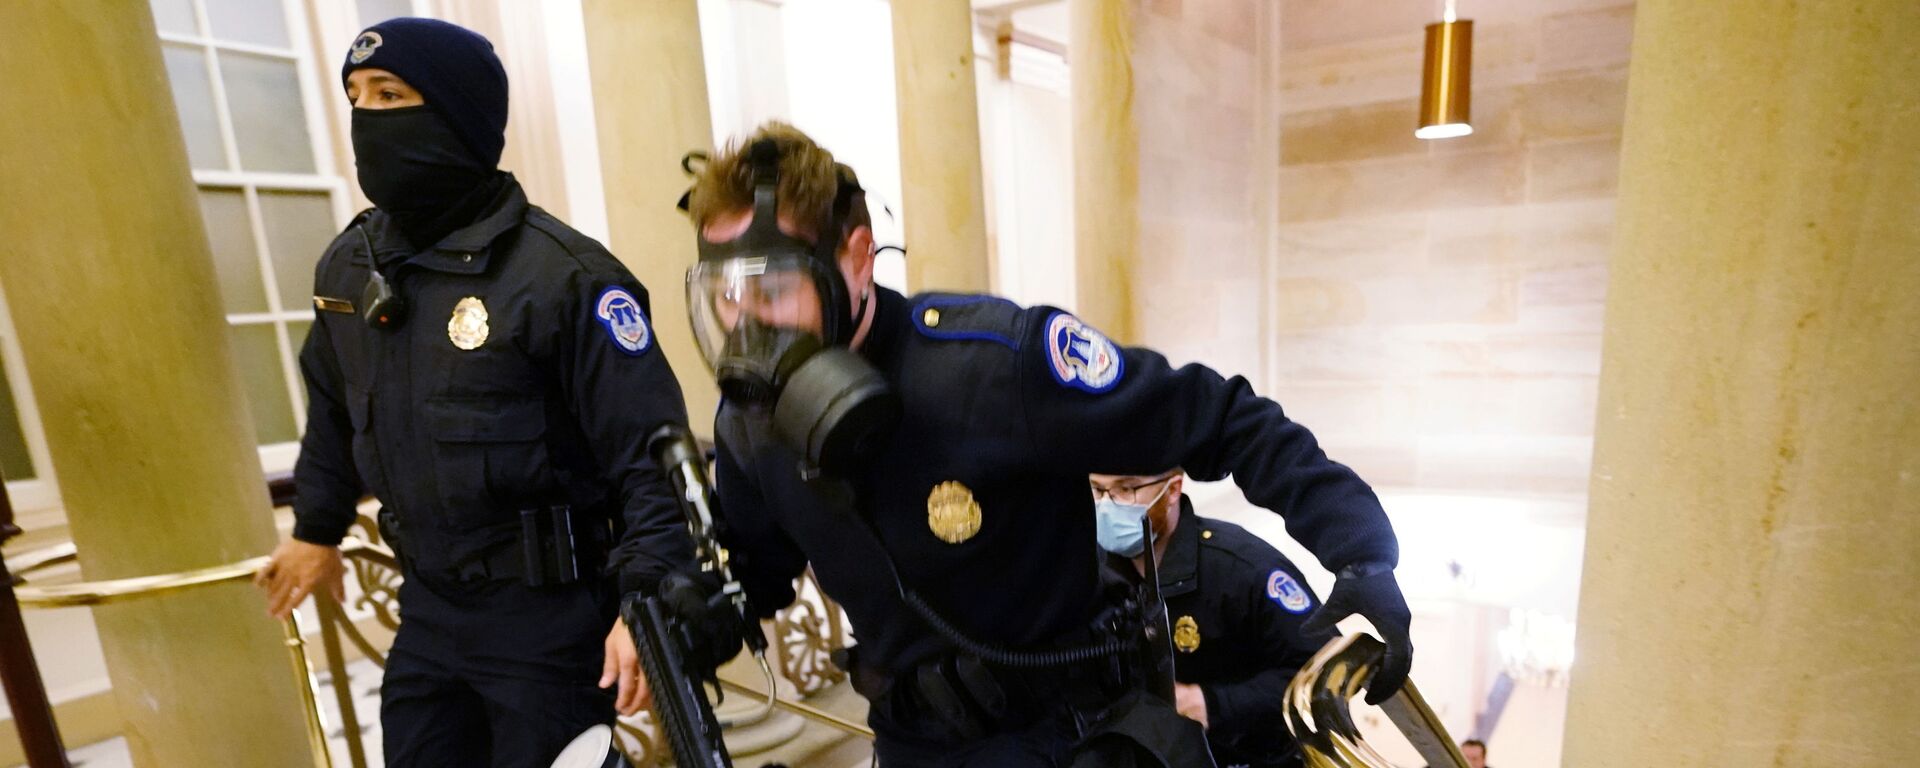 U.S. Capitol police officers take positions as protestors enter the Capitol building during a joint session of Congress to certify the 2020 election results on Capitol Hill in Washington, U.S., January 6, 2021. - Sputnik International, 1920